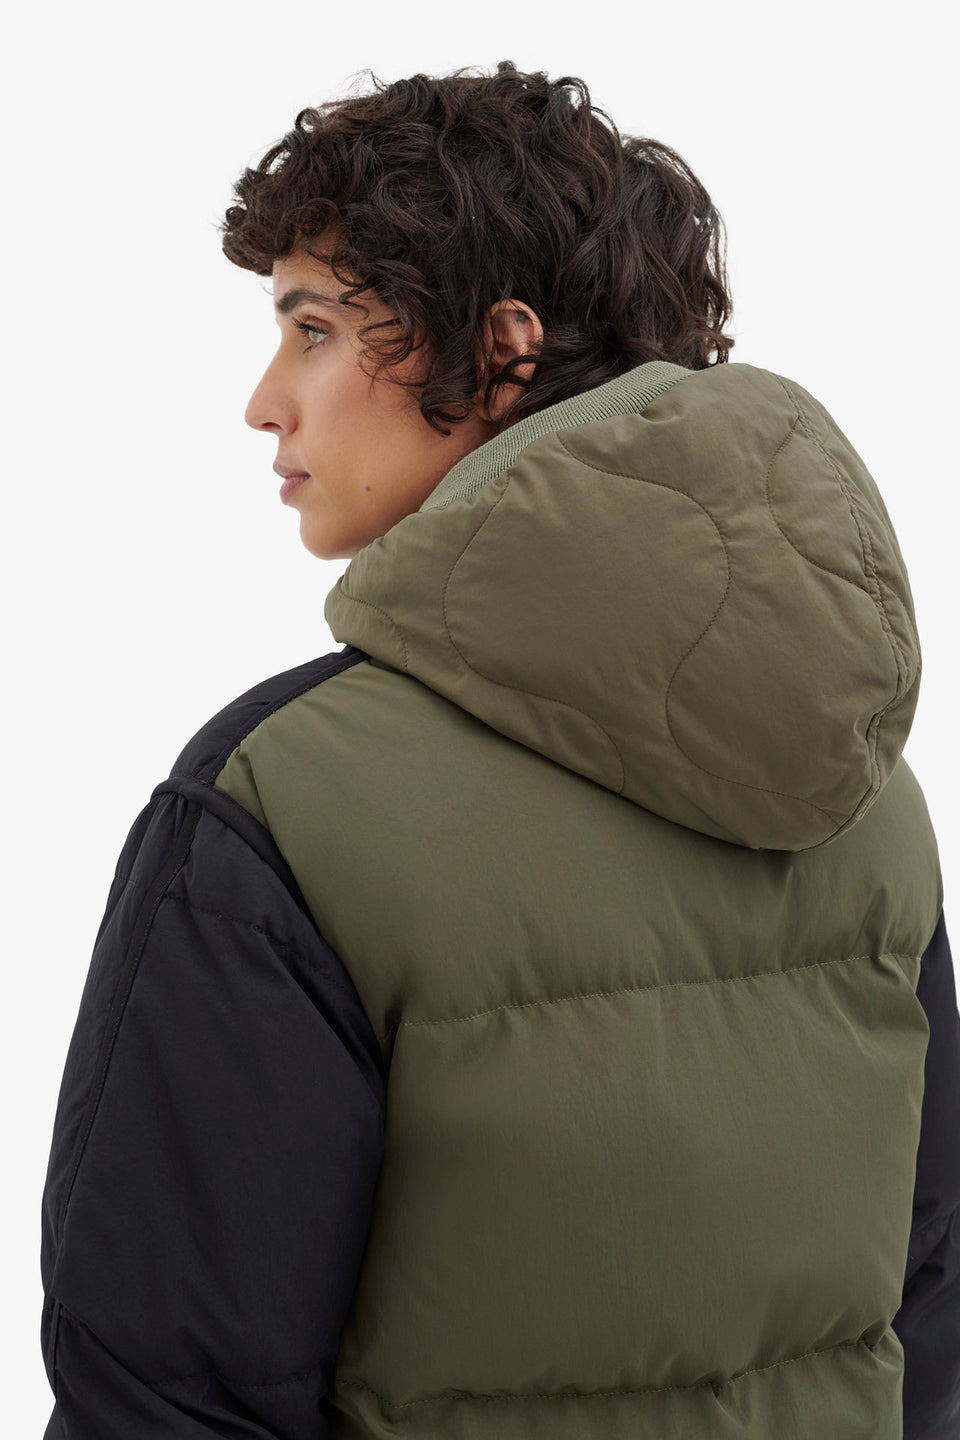 Down Close Fit Hood - Black / Moss (listing page thumbnail)